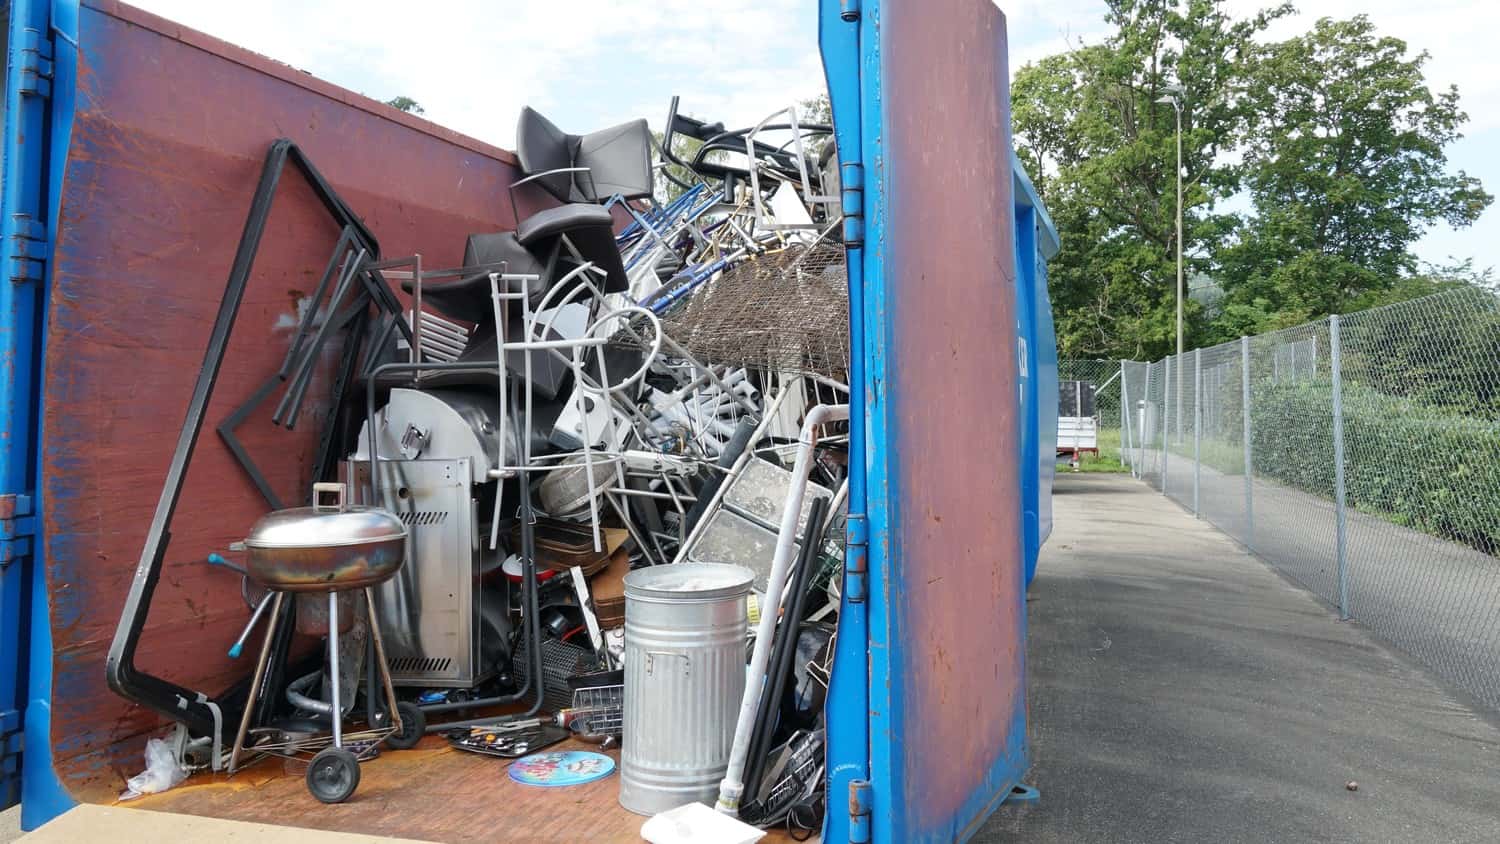 A pile of scrap metal ready for removal, consisting of various shapes and sizes, on a back of a truck.